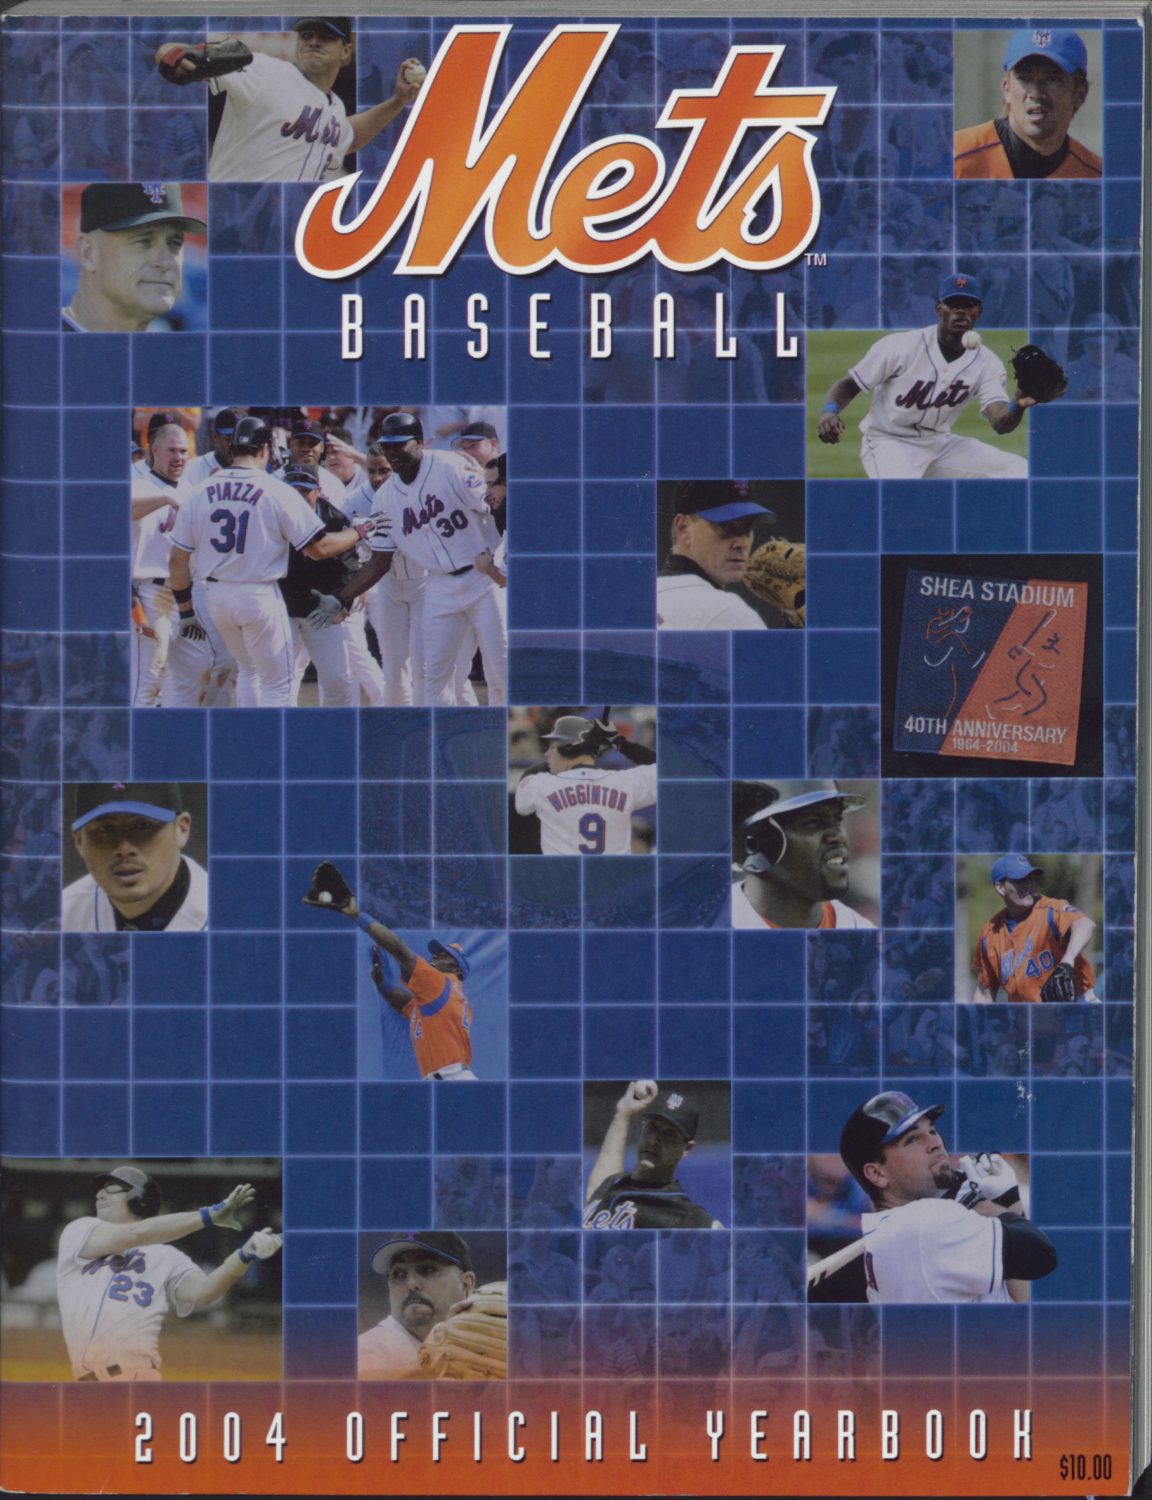 2004 New York Mets Yearbook: 40 Years at Shea